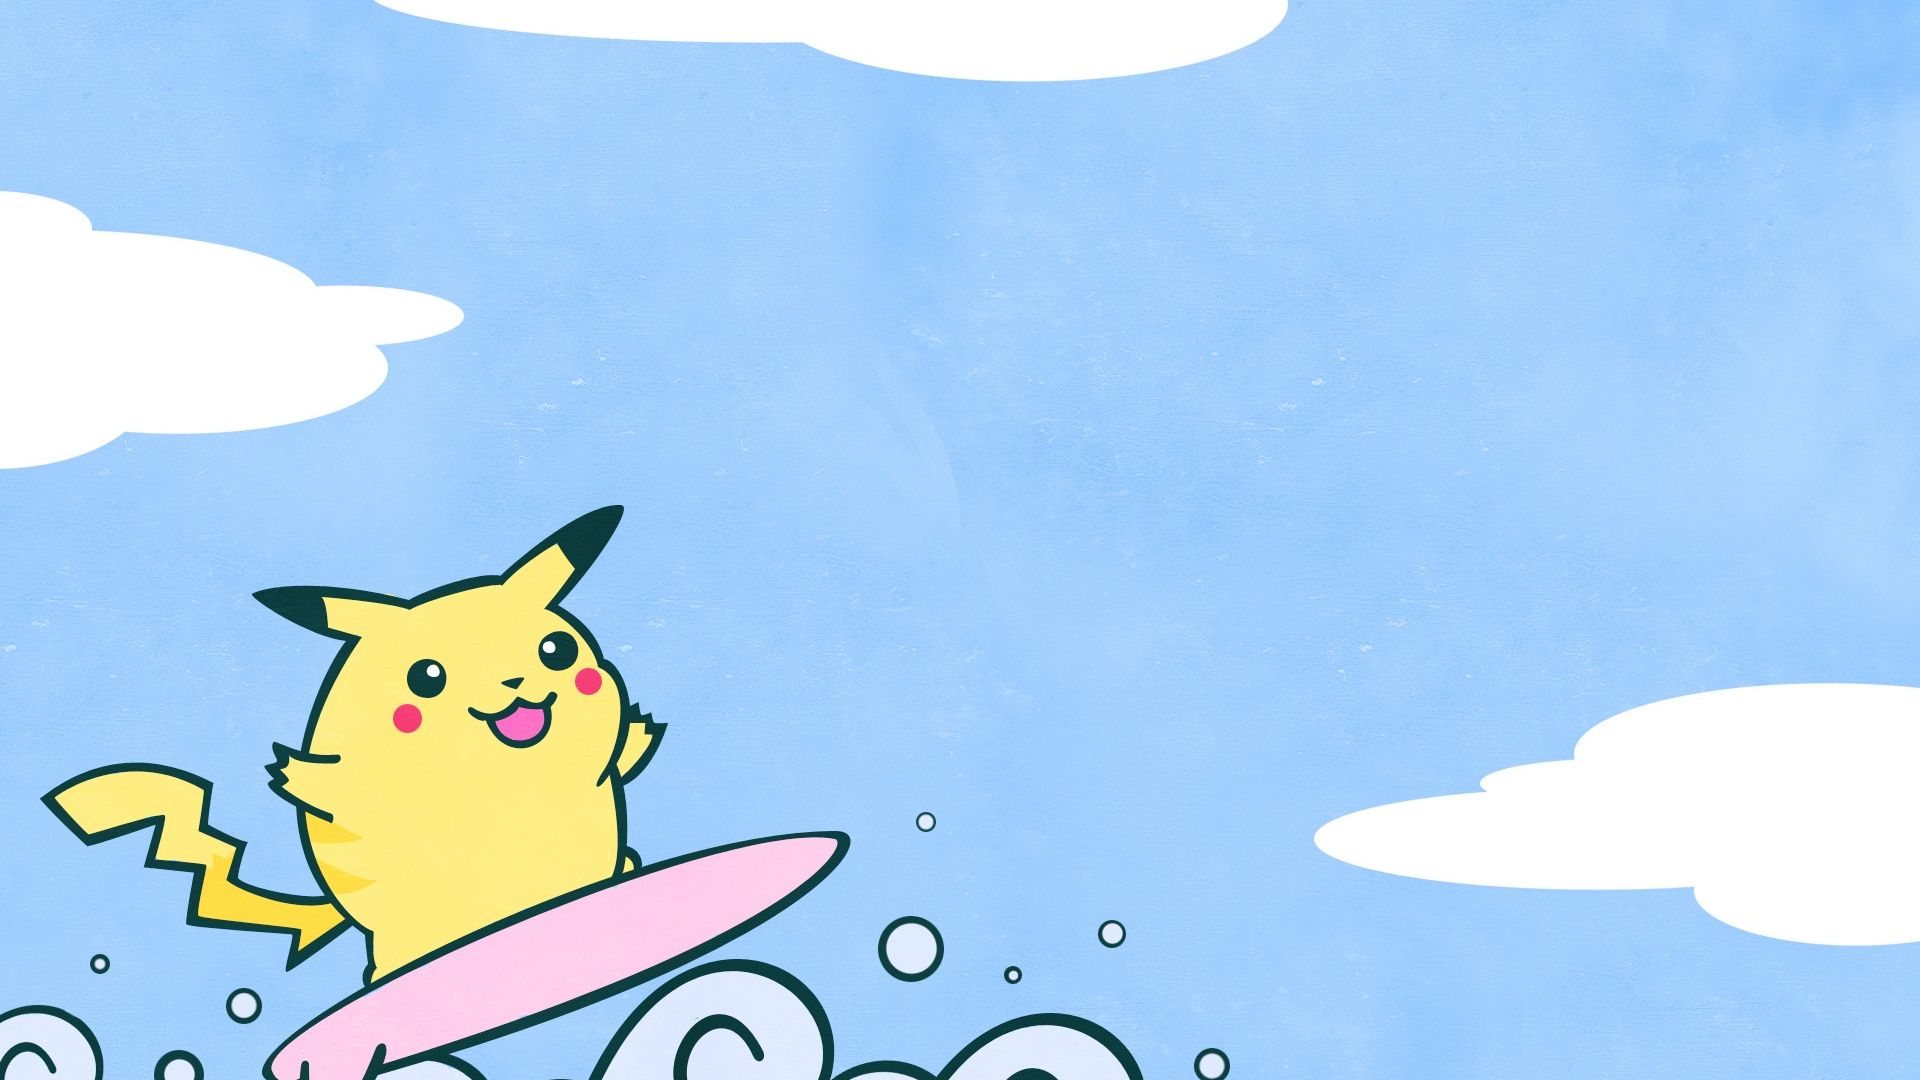 A surfing Pikachu wallpaper for your desktop or phone. - Pikachu